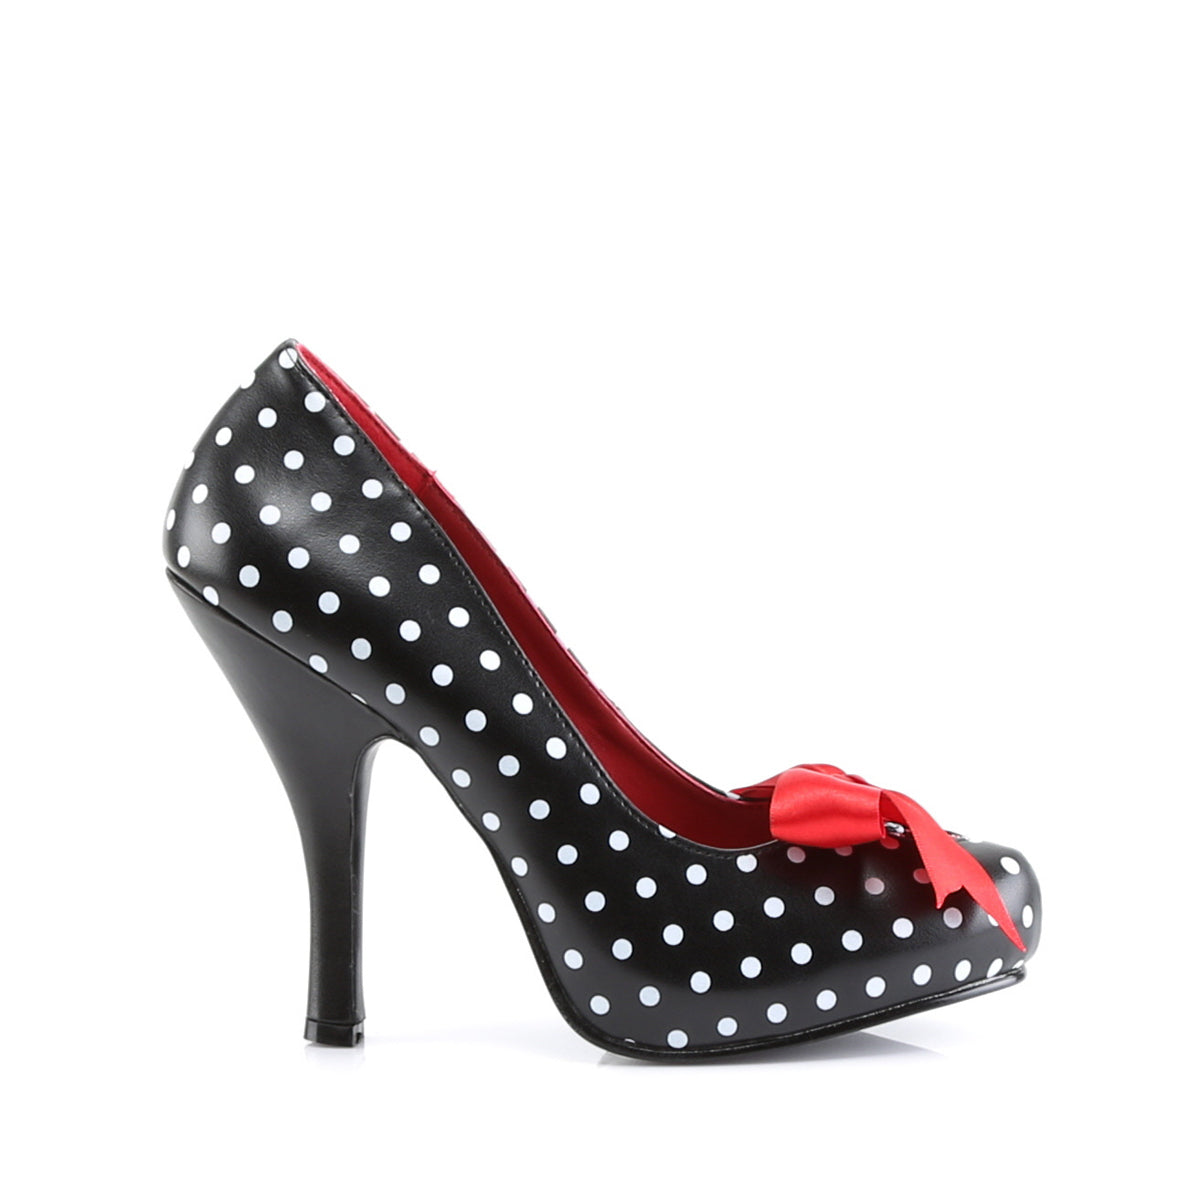 CUTIEPIE-06 Pin Up 4.5 Inch Heel (Polka Dots Print) Shoes-Pin Up Couture- Sexy Shoes Fetish Heels